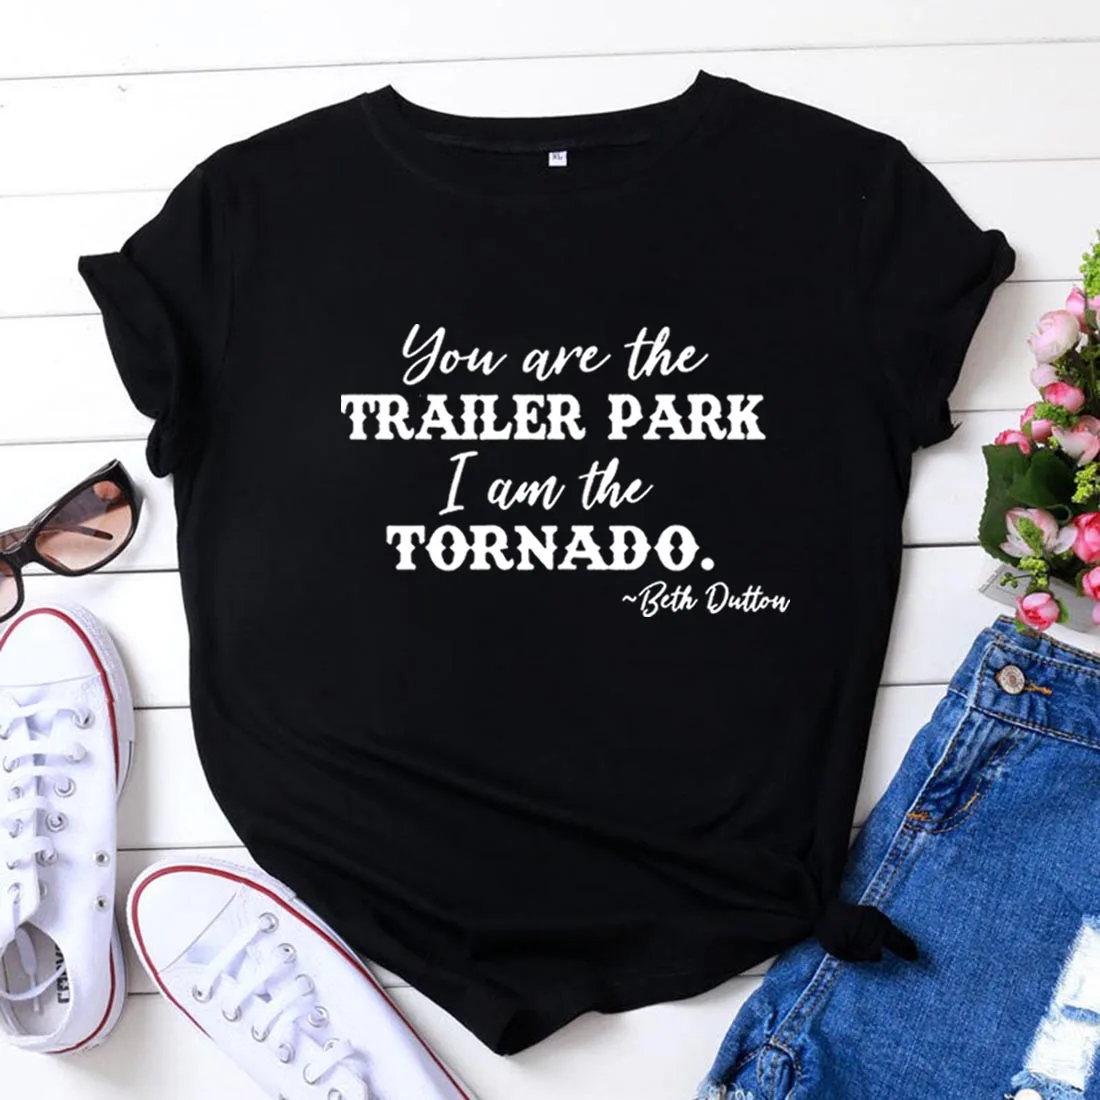 You Are The Trailer Park Funny T Shirts Women Tshirt Loose Camiseta ...